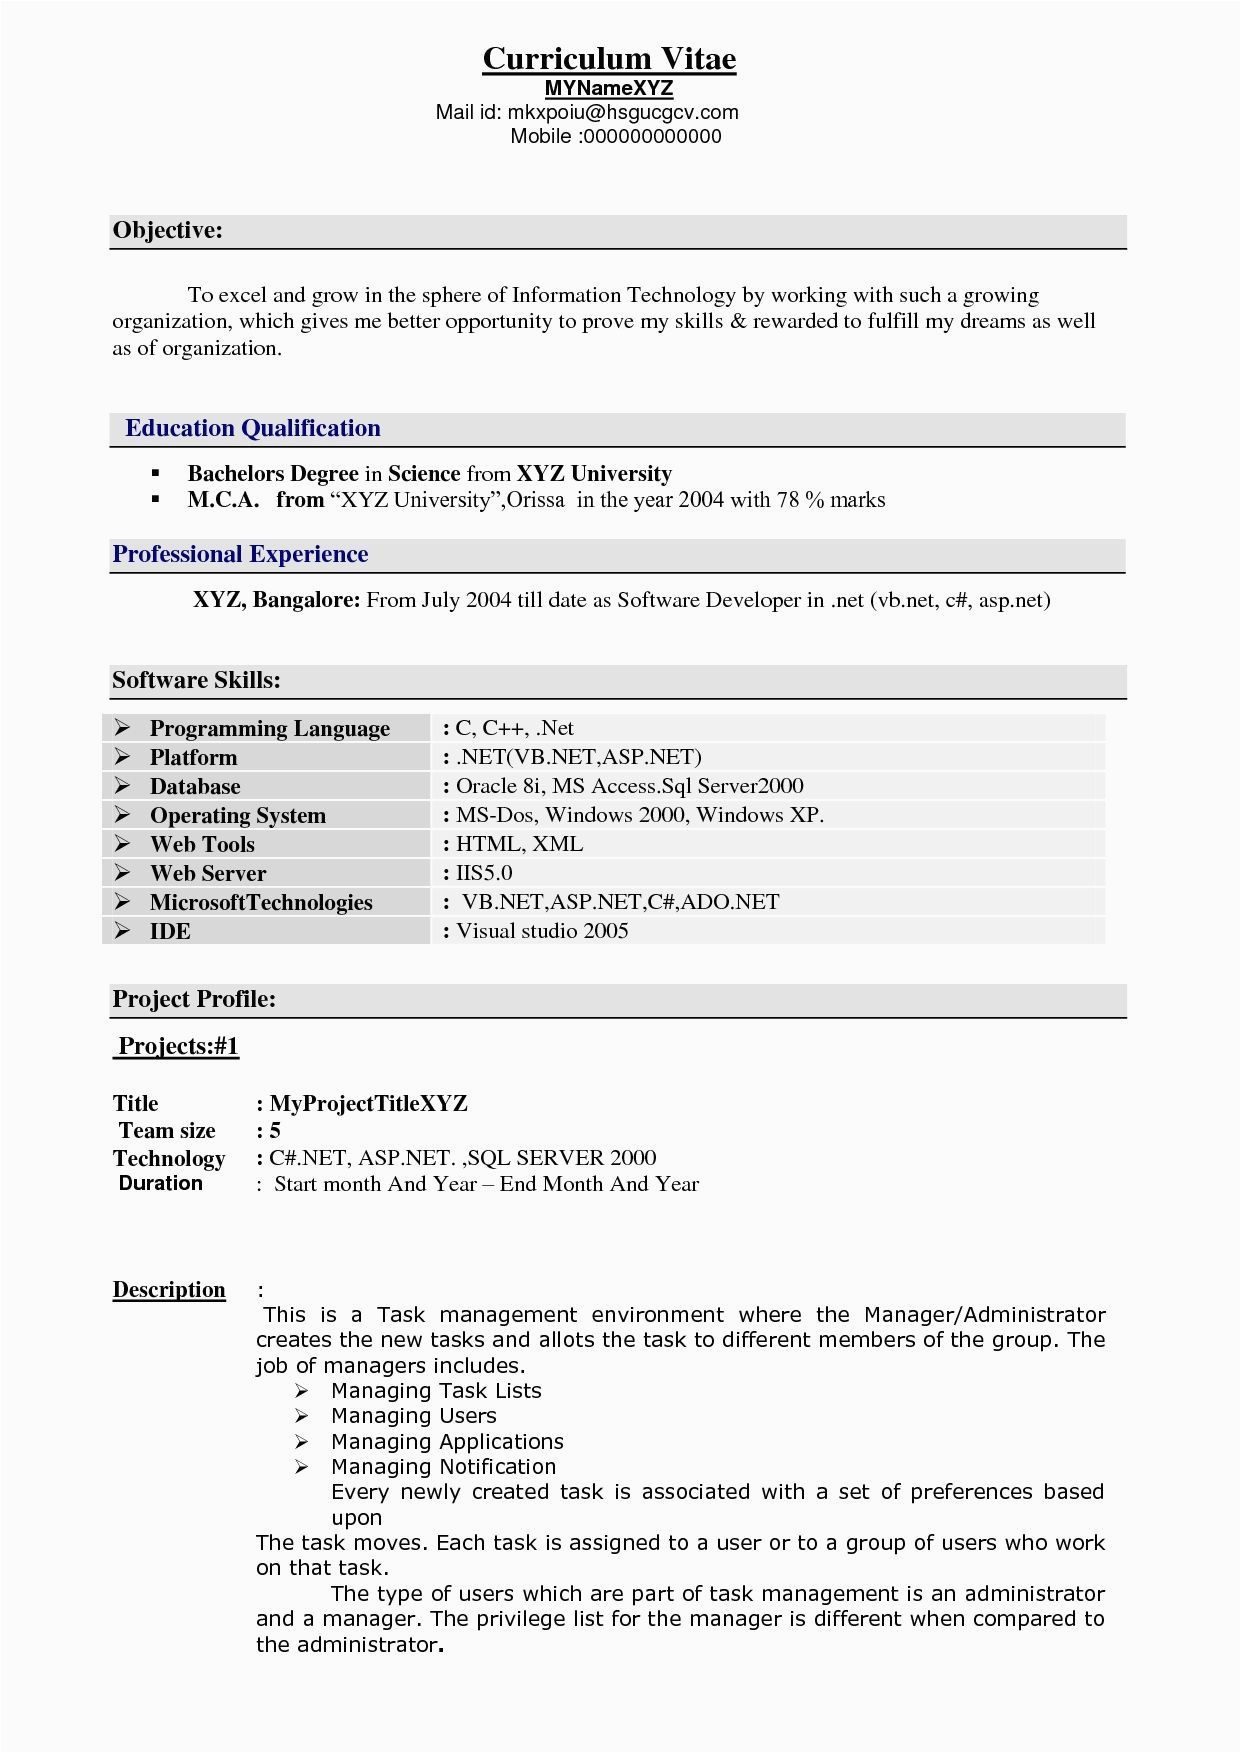 Best Sample Resume format for Experienced Best Resume format Experience Resume format for Xml